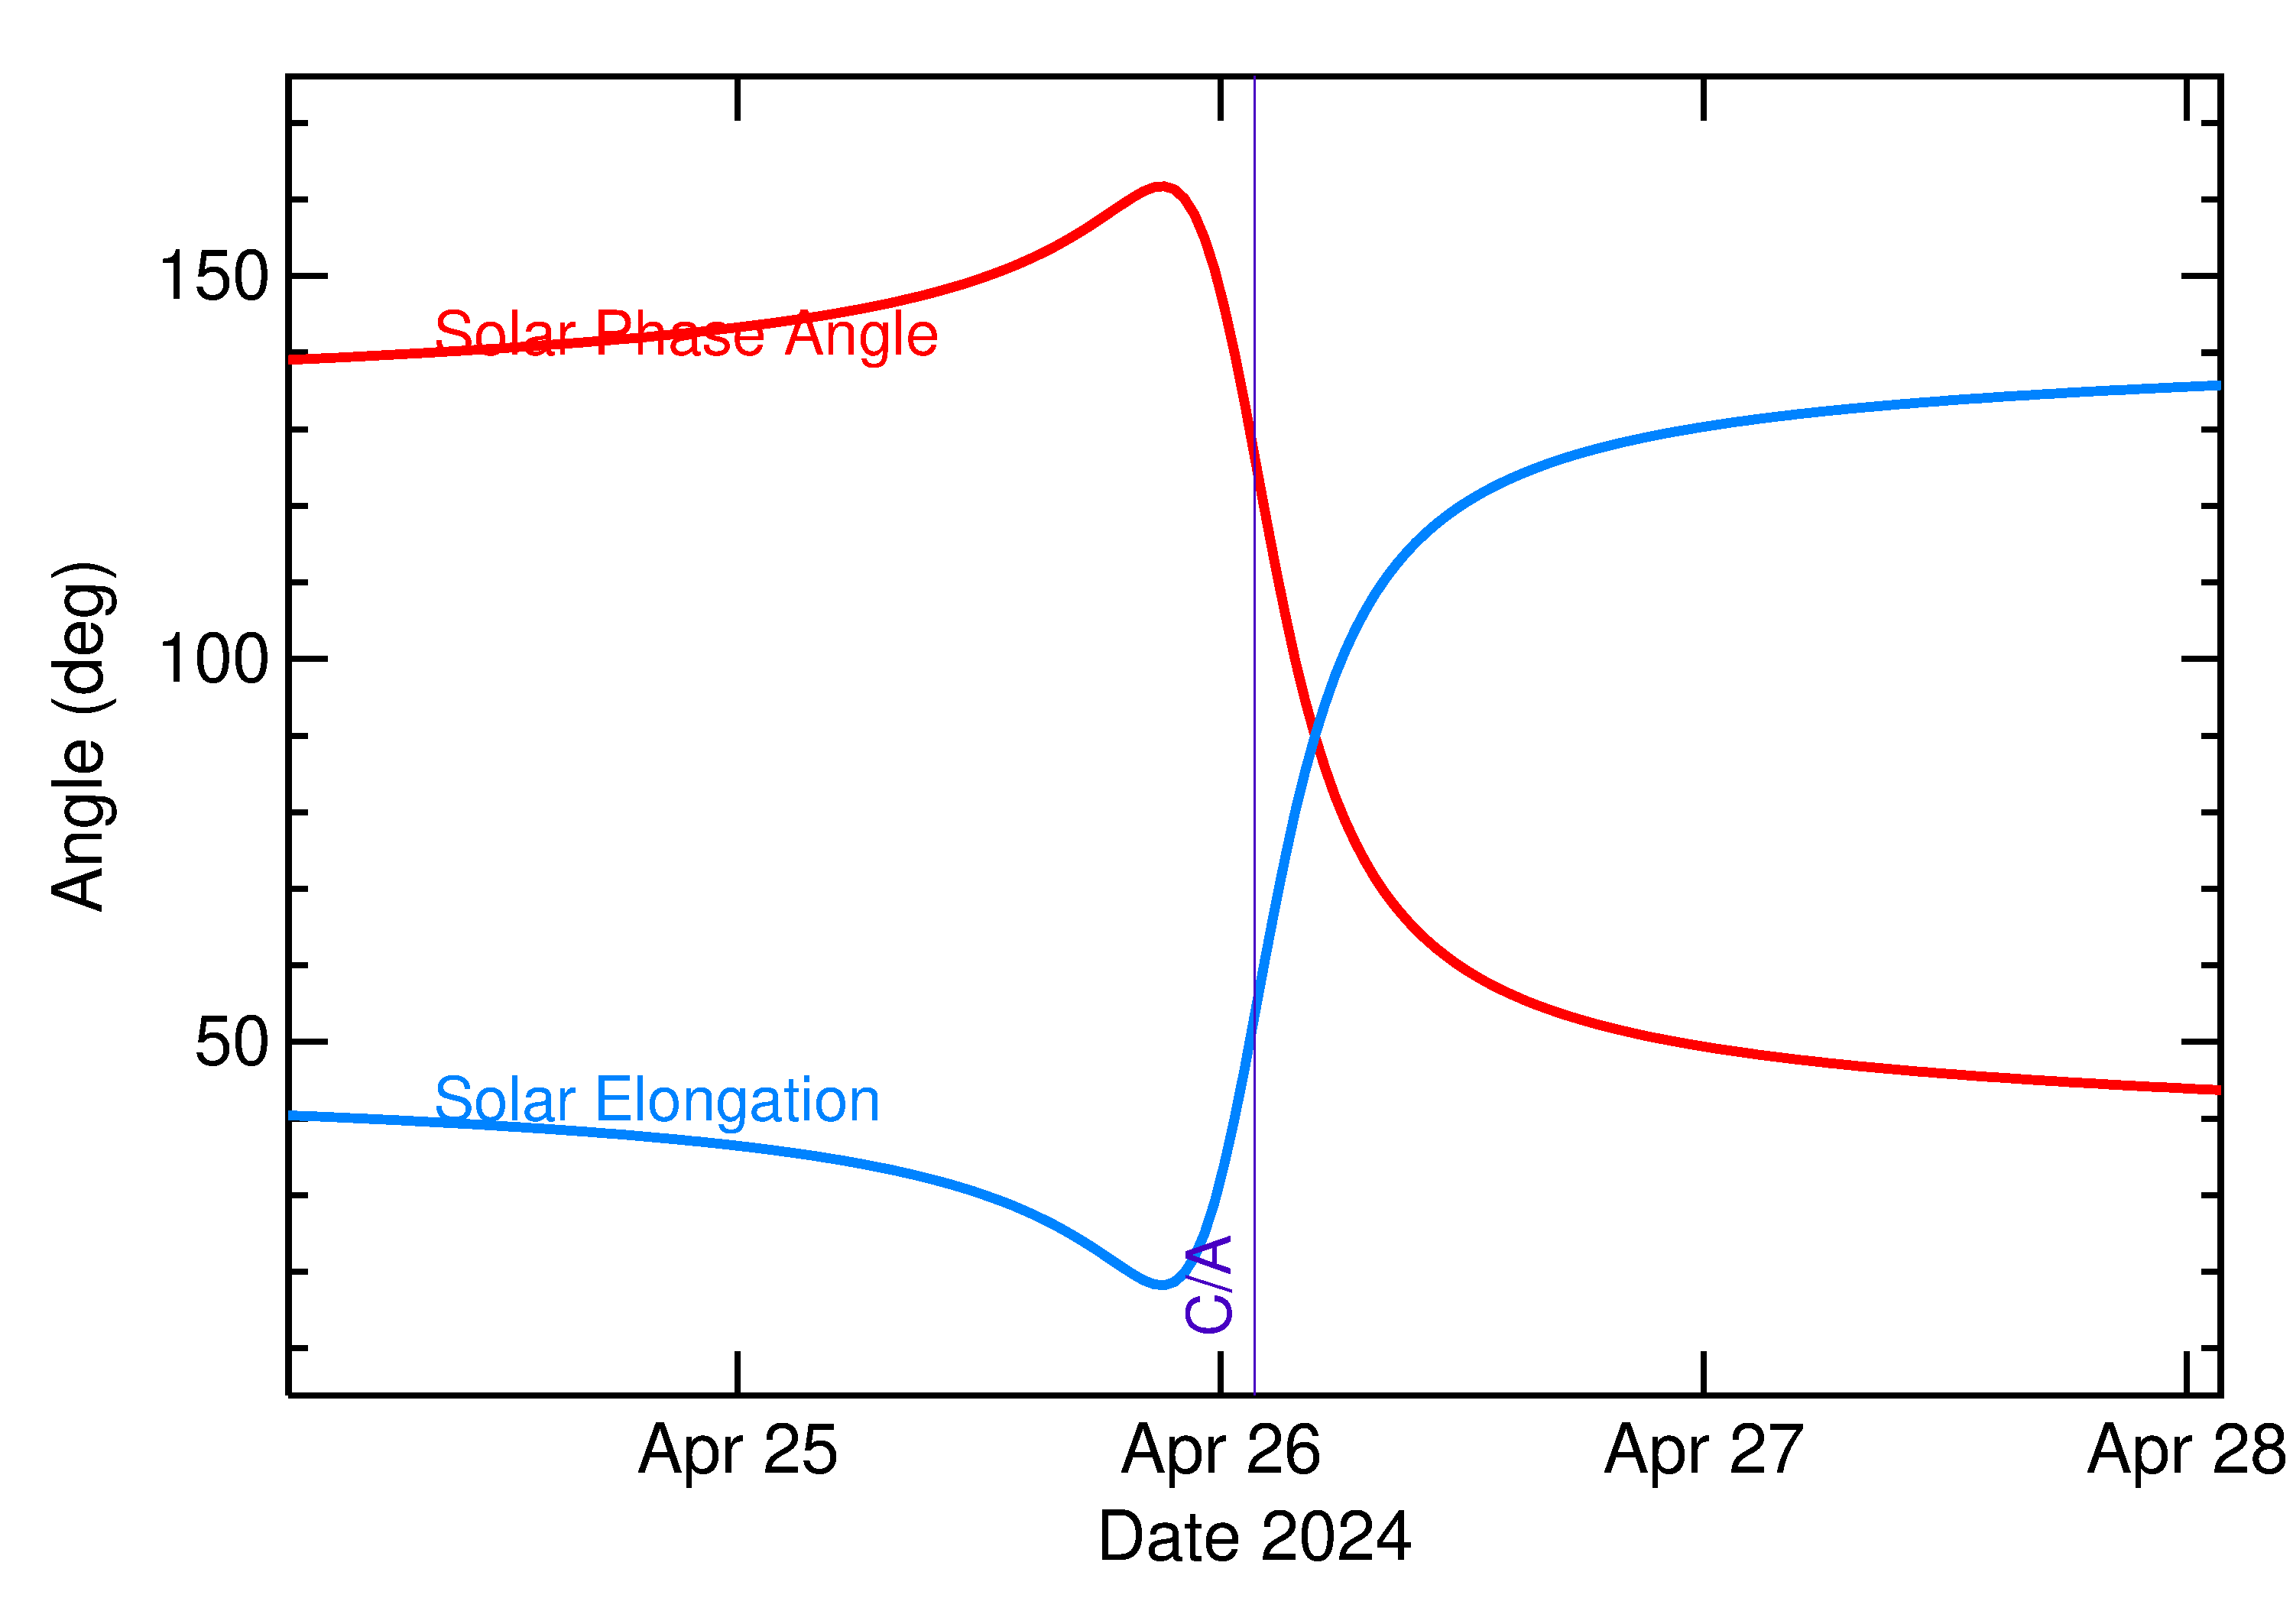 Solar Elongation and Solar Phase Angle of 2024 HL1 in the days around closest approach